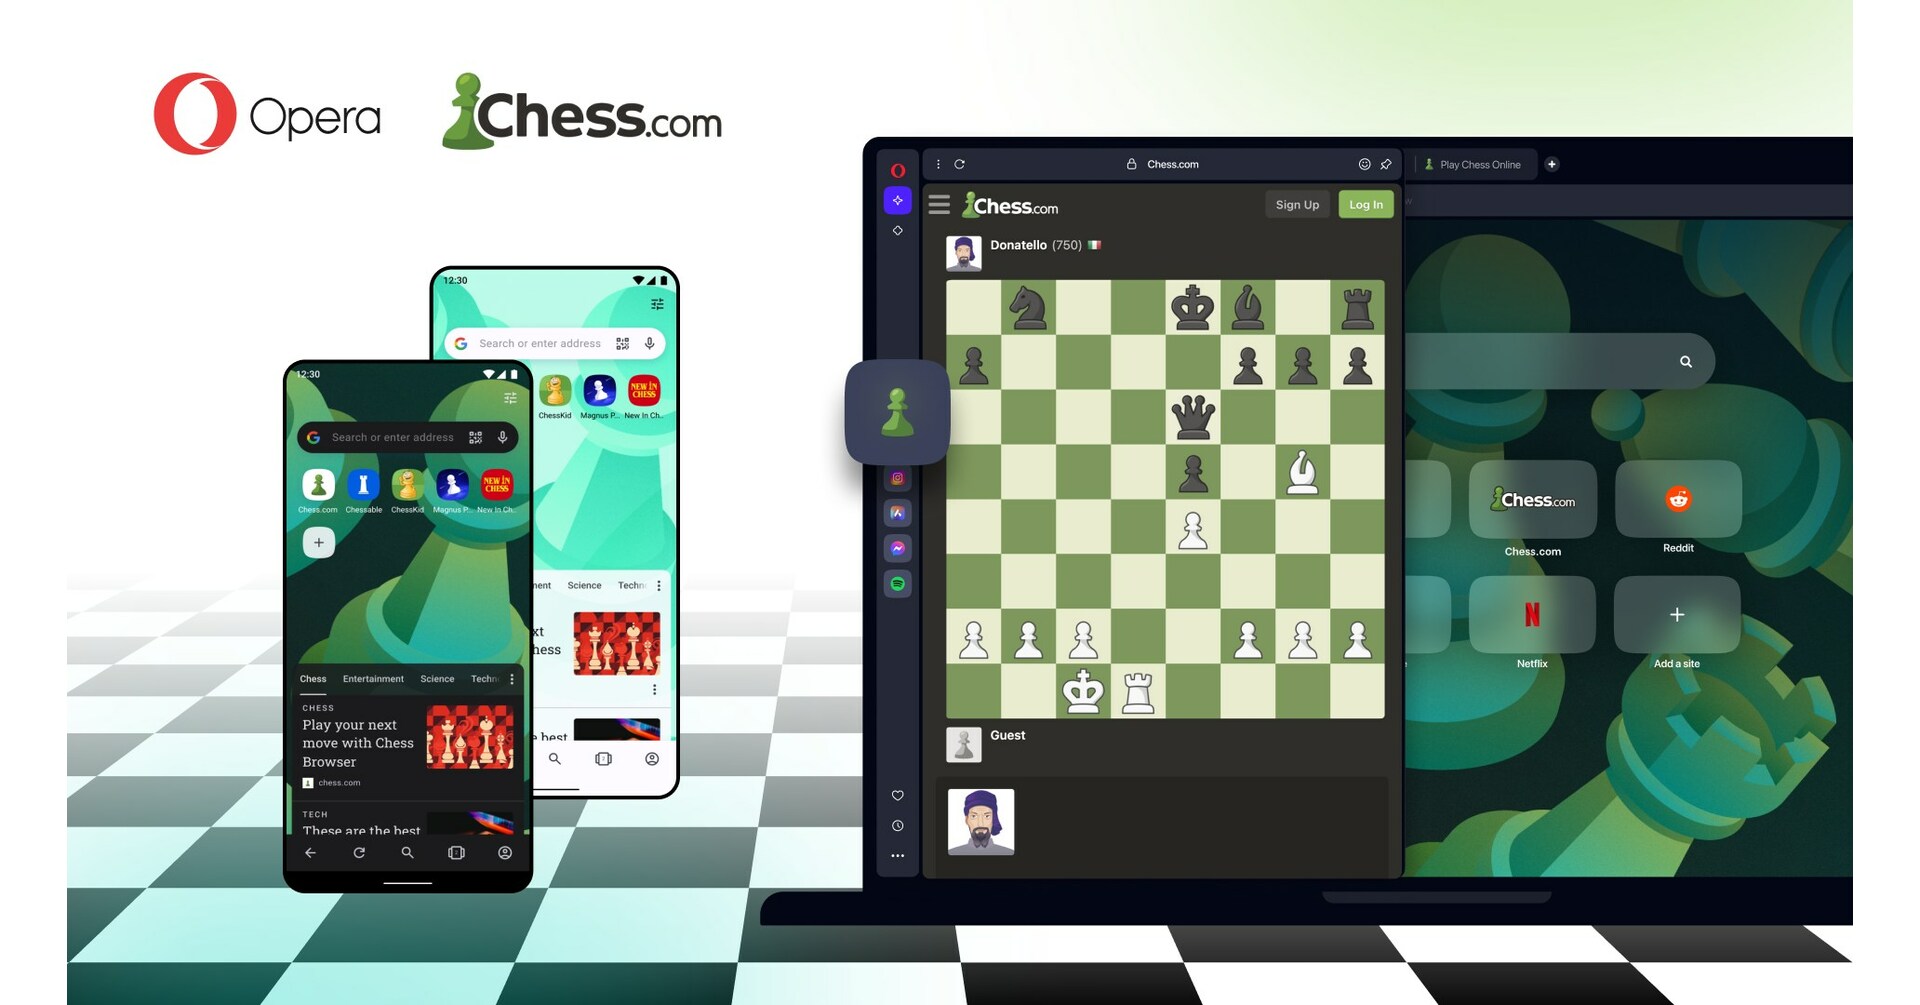 Chessable - Today's blog takes a look at an exciting NEW